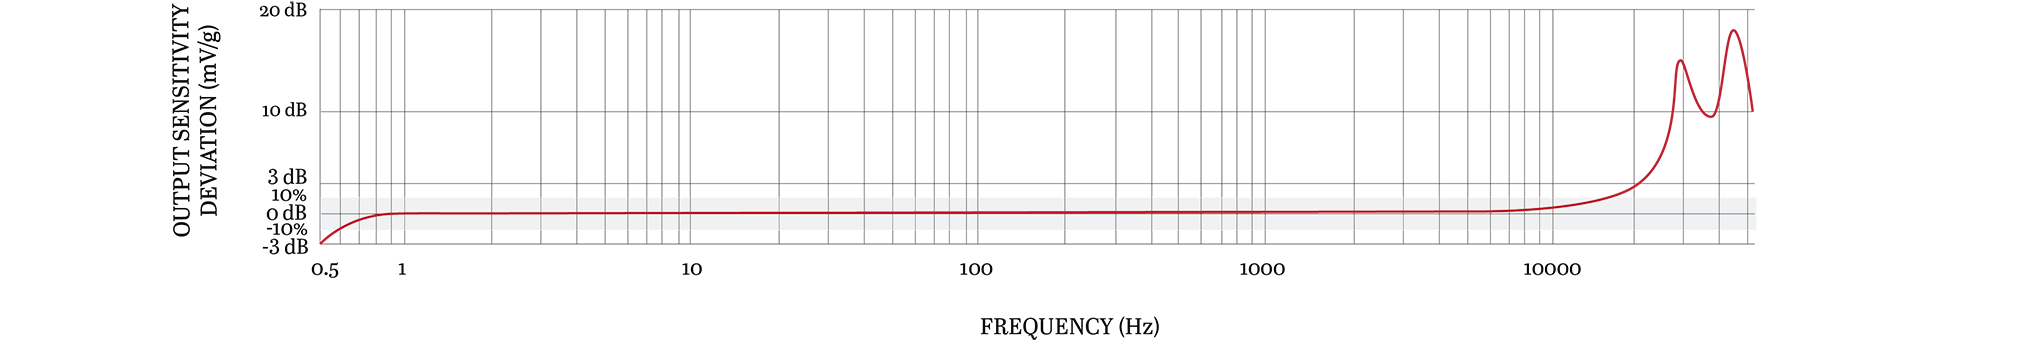 A line graph showing the frequency resopnse of a CTC UEB334 condition monitoring sensor.